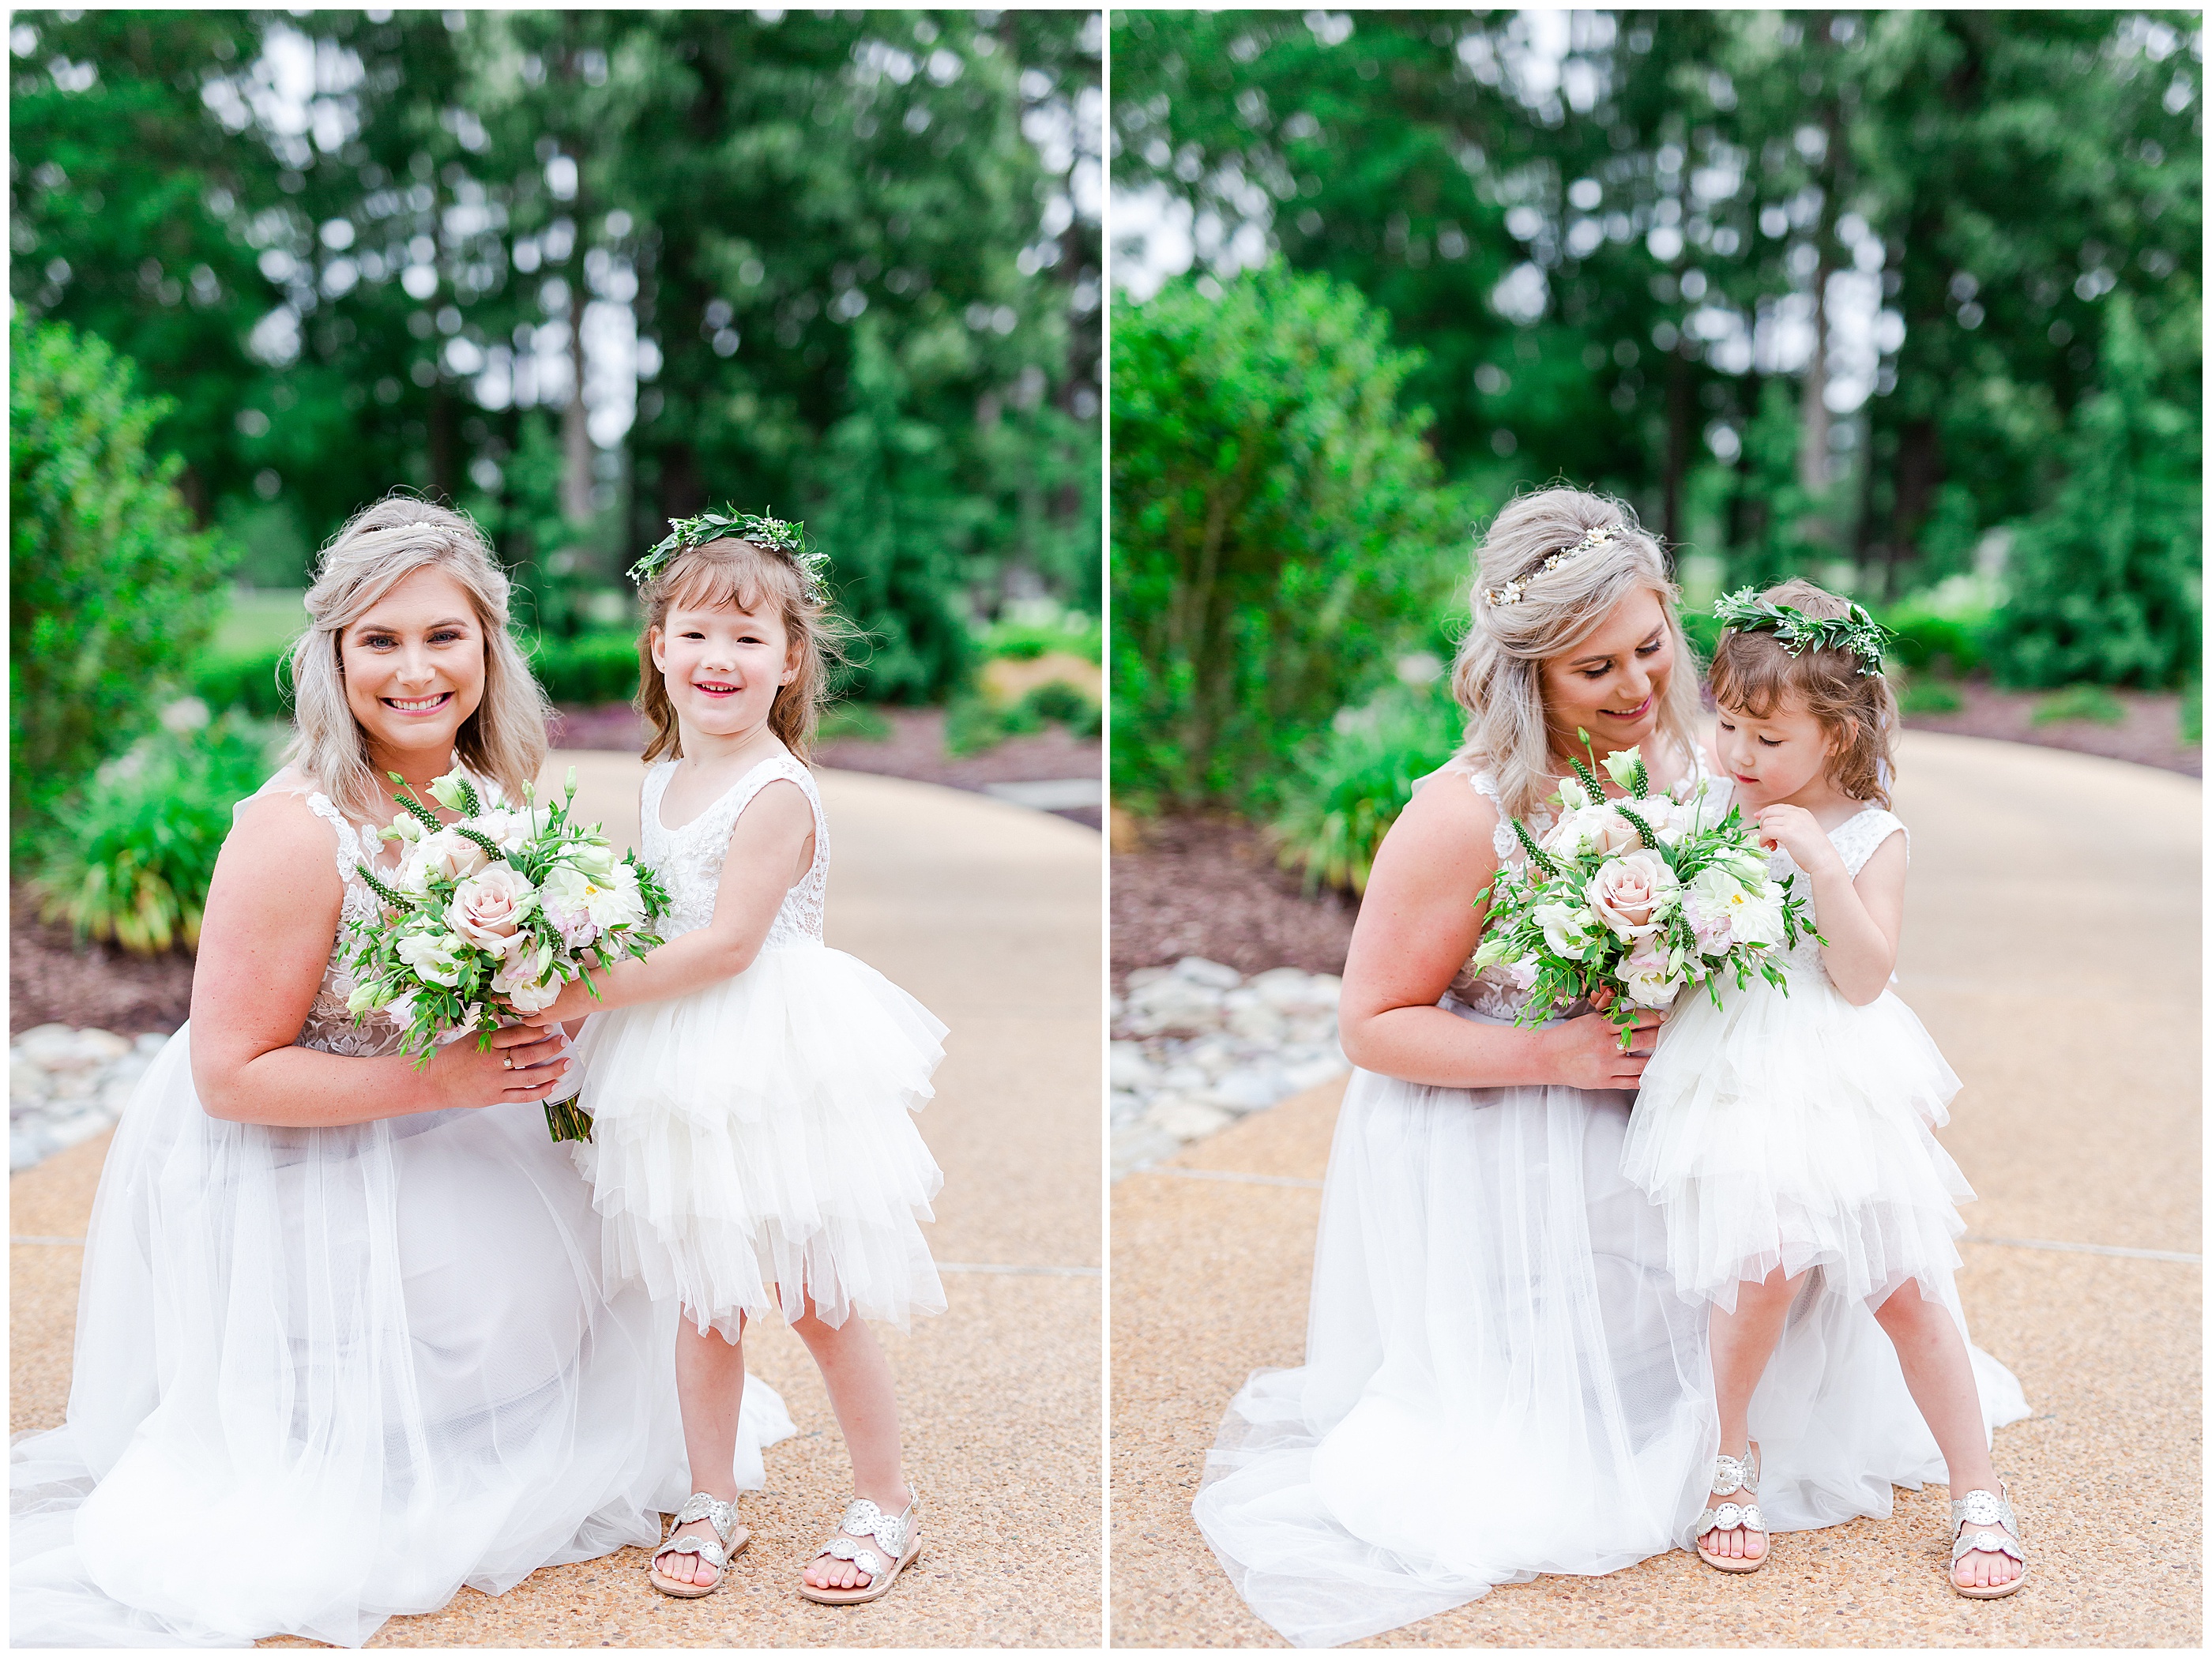 Bride with flower girl photos Luke and Ashley Photography 